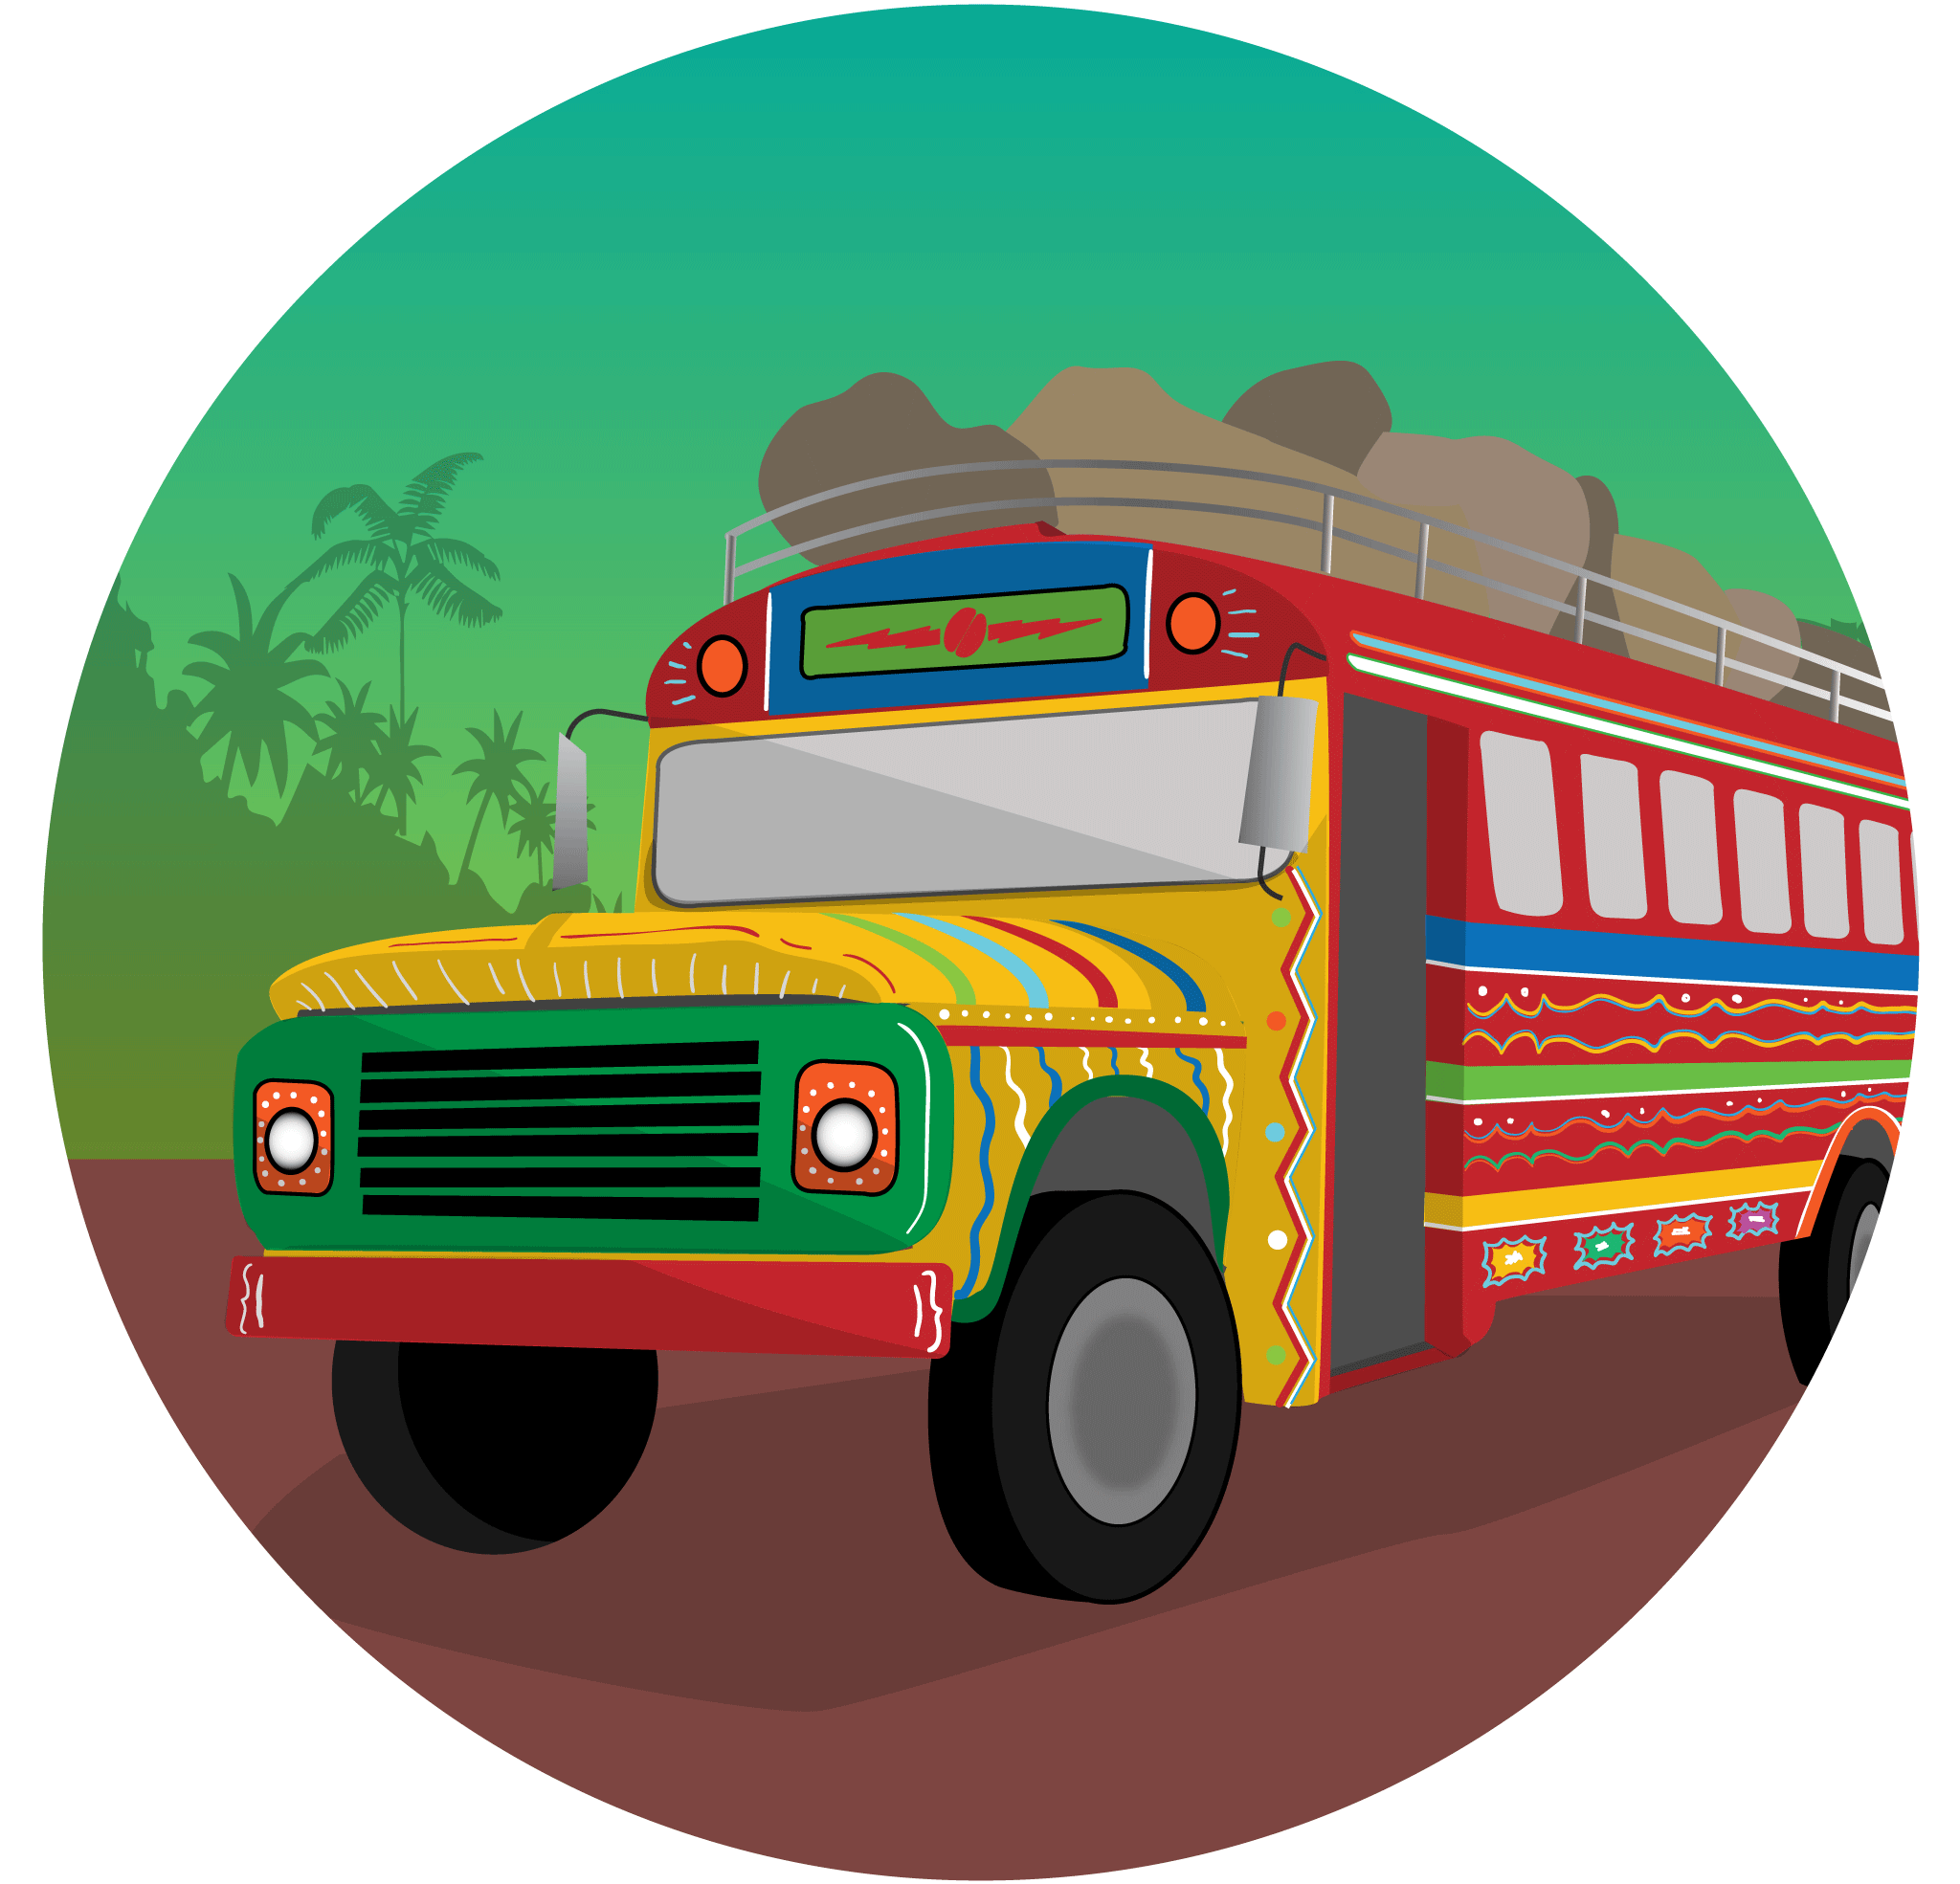 Illustration of a bus used for transportation in a tropical location